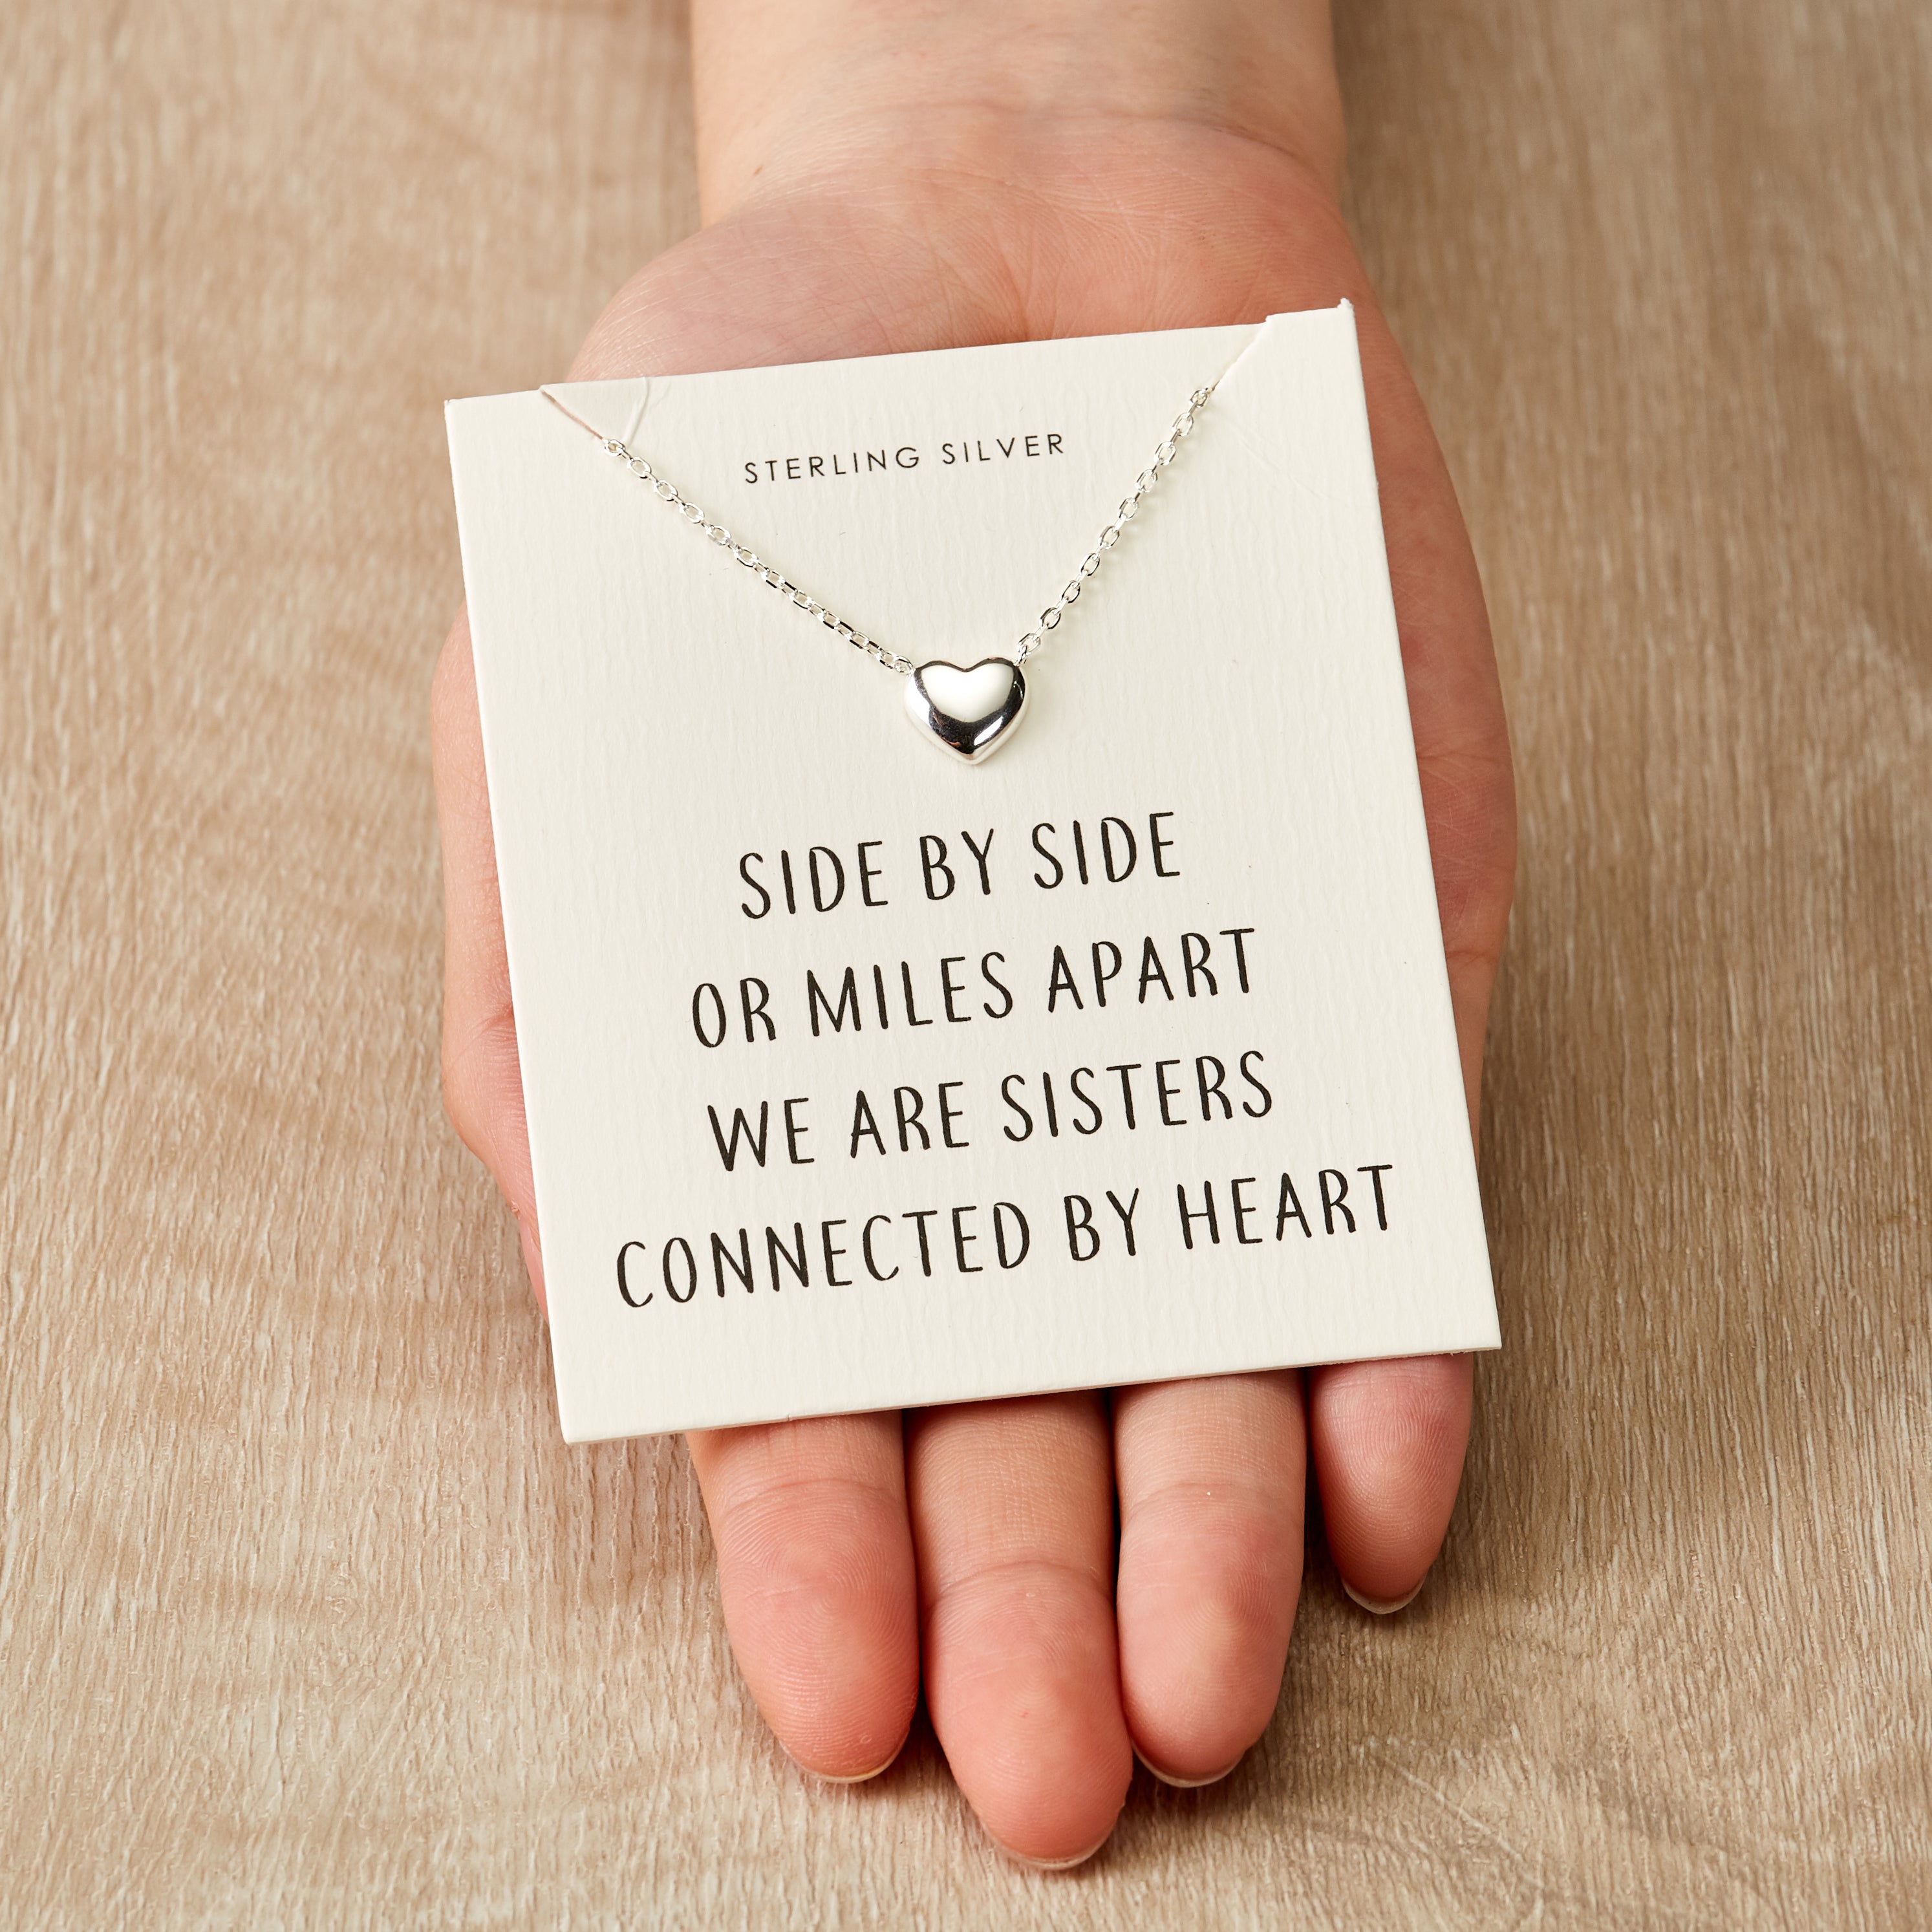 Sterling Silver Sister Heart Necklace with Quote Card